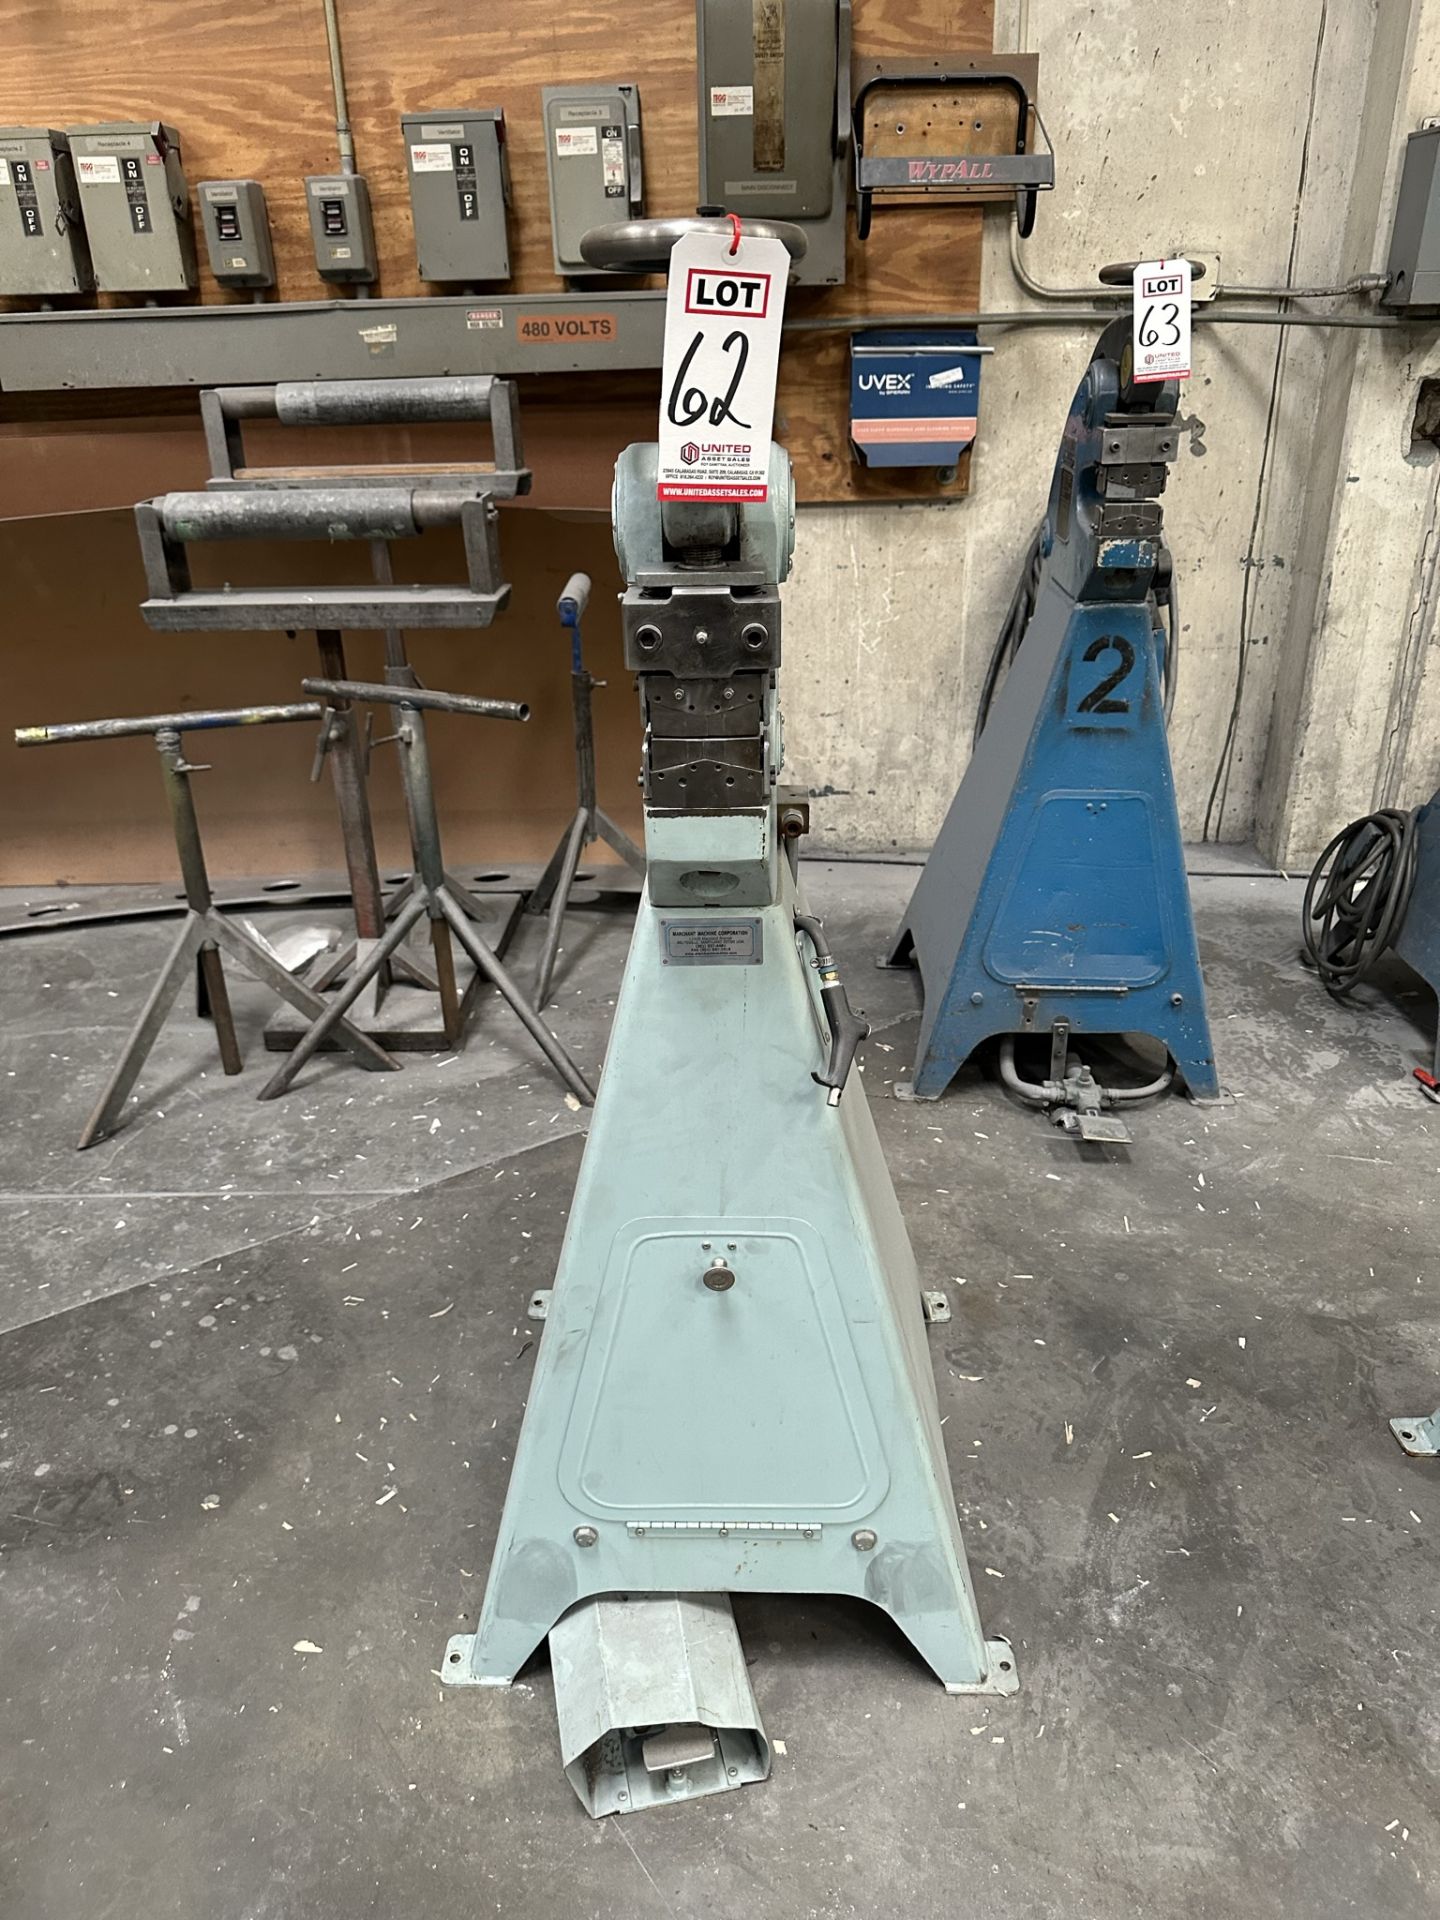 2019 MARCHANT MACHINE CORP SHRINKING AND STRETCHING MACHINE, MODEL 6A, S/N 382 - Image 3 of 4